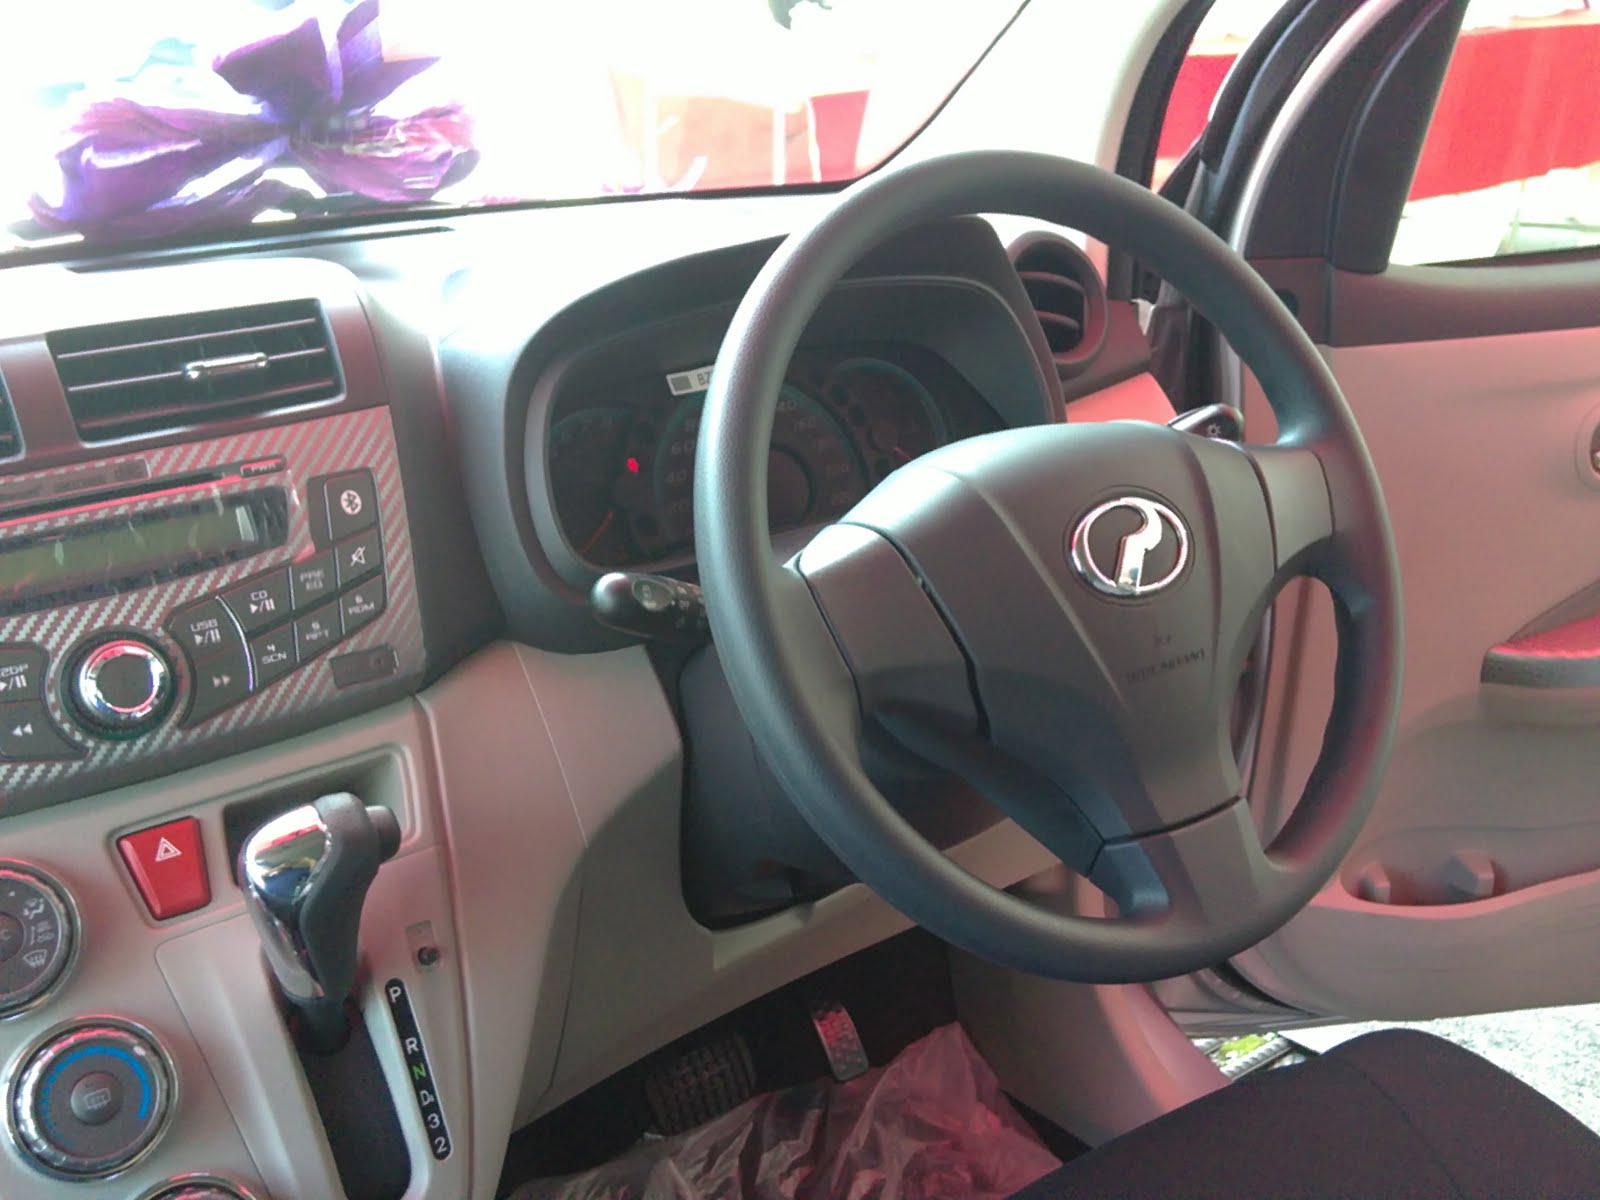 Motoring-Malaysia: The New Perodua Myvi: Pictures and Opinion